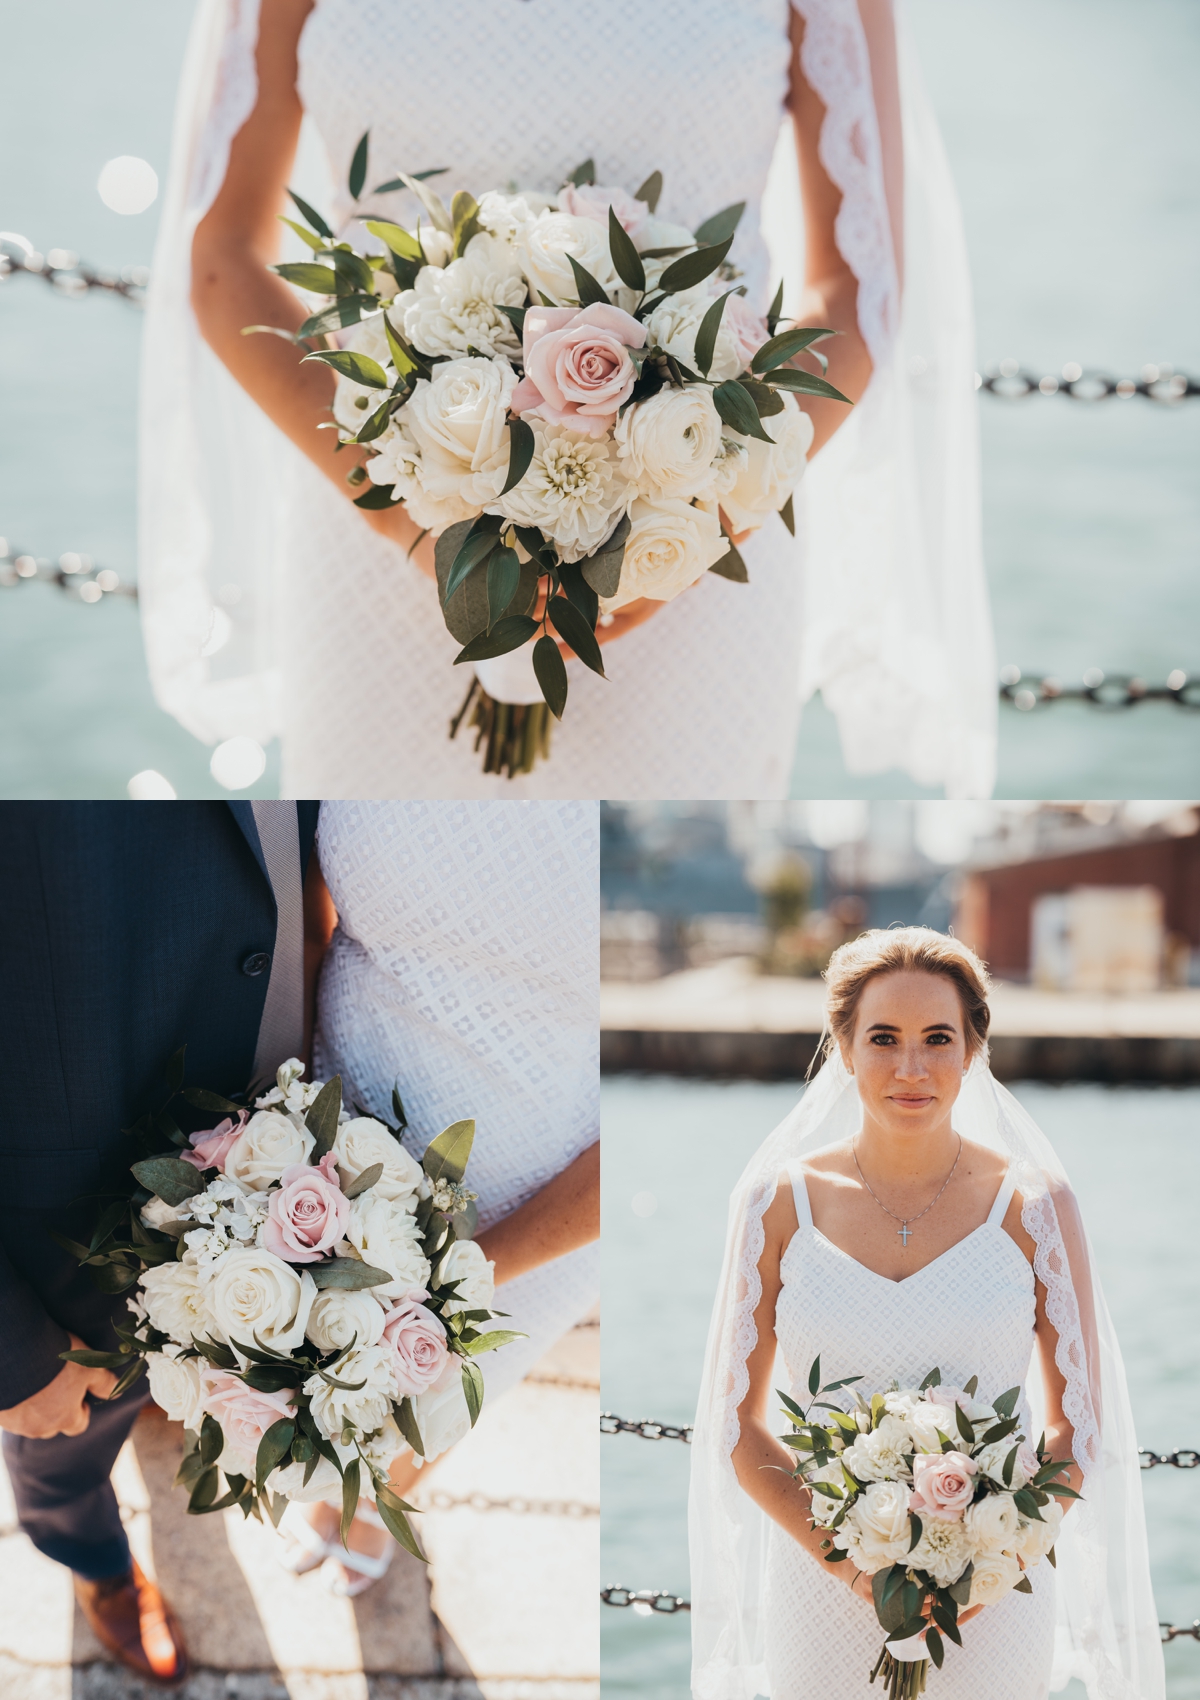 Bridal bouquet with white and blush roses, ranunculus and dahlias